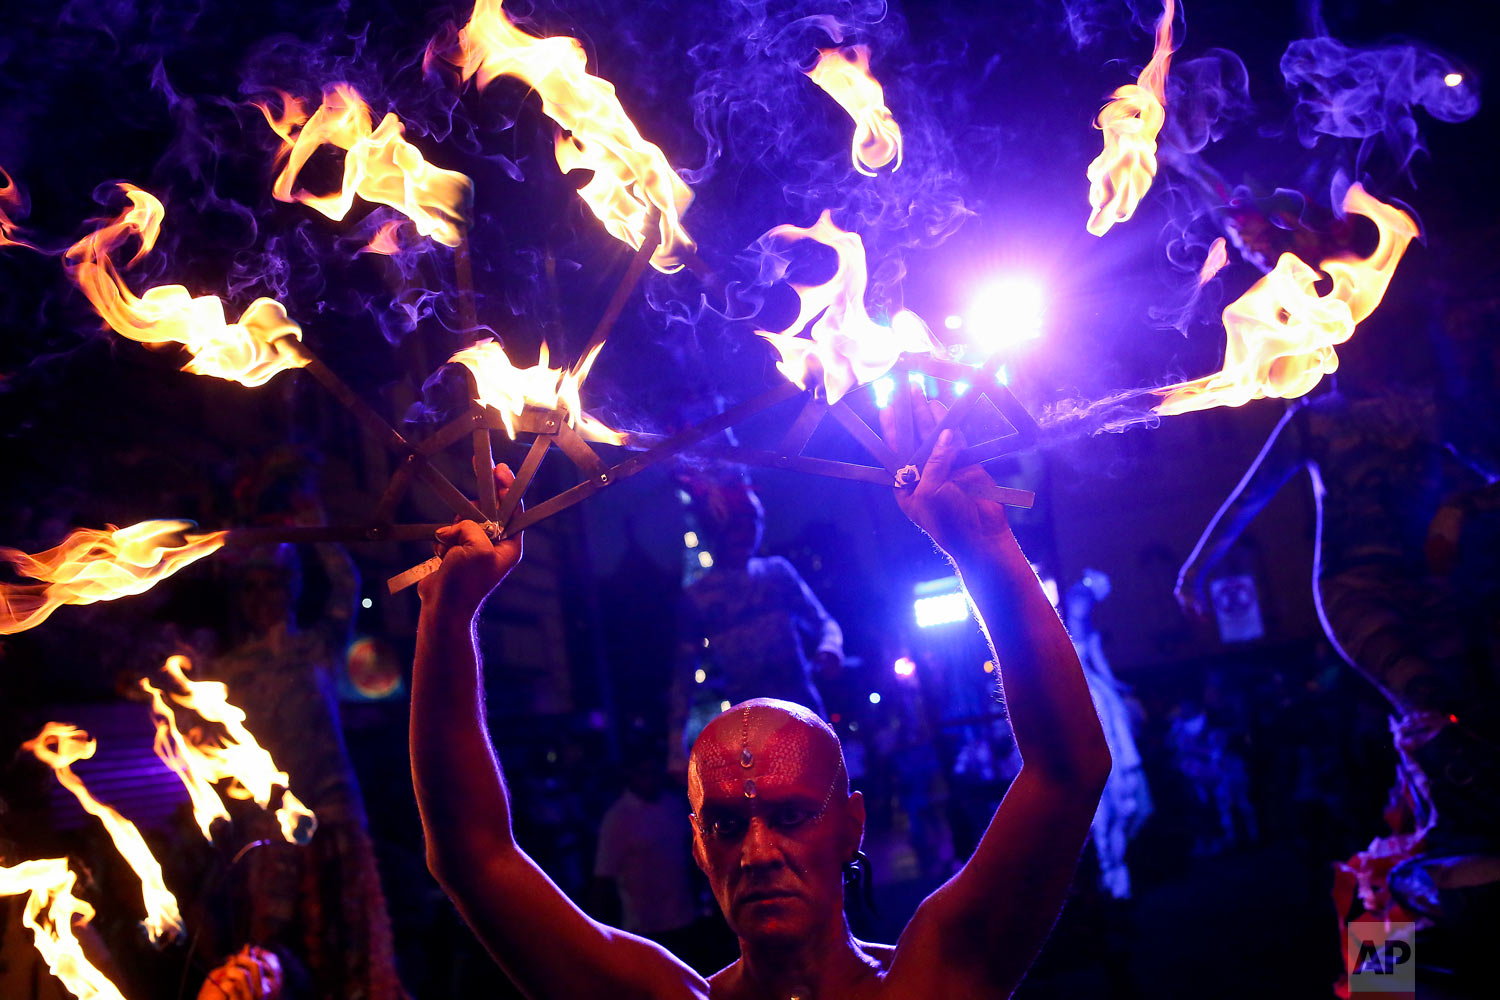  Dancers perform with fire during the Dance, Theater and Visual Arts International Festival Santiago "A Mil" in Santiago, Chile, Jan. 3, 2019. (AP Photo/Esteban Felix) 